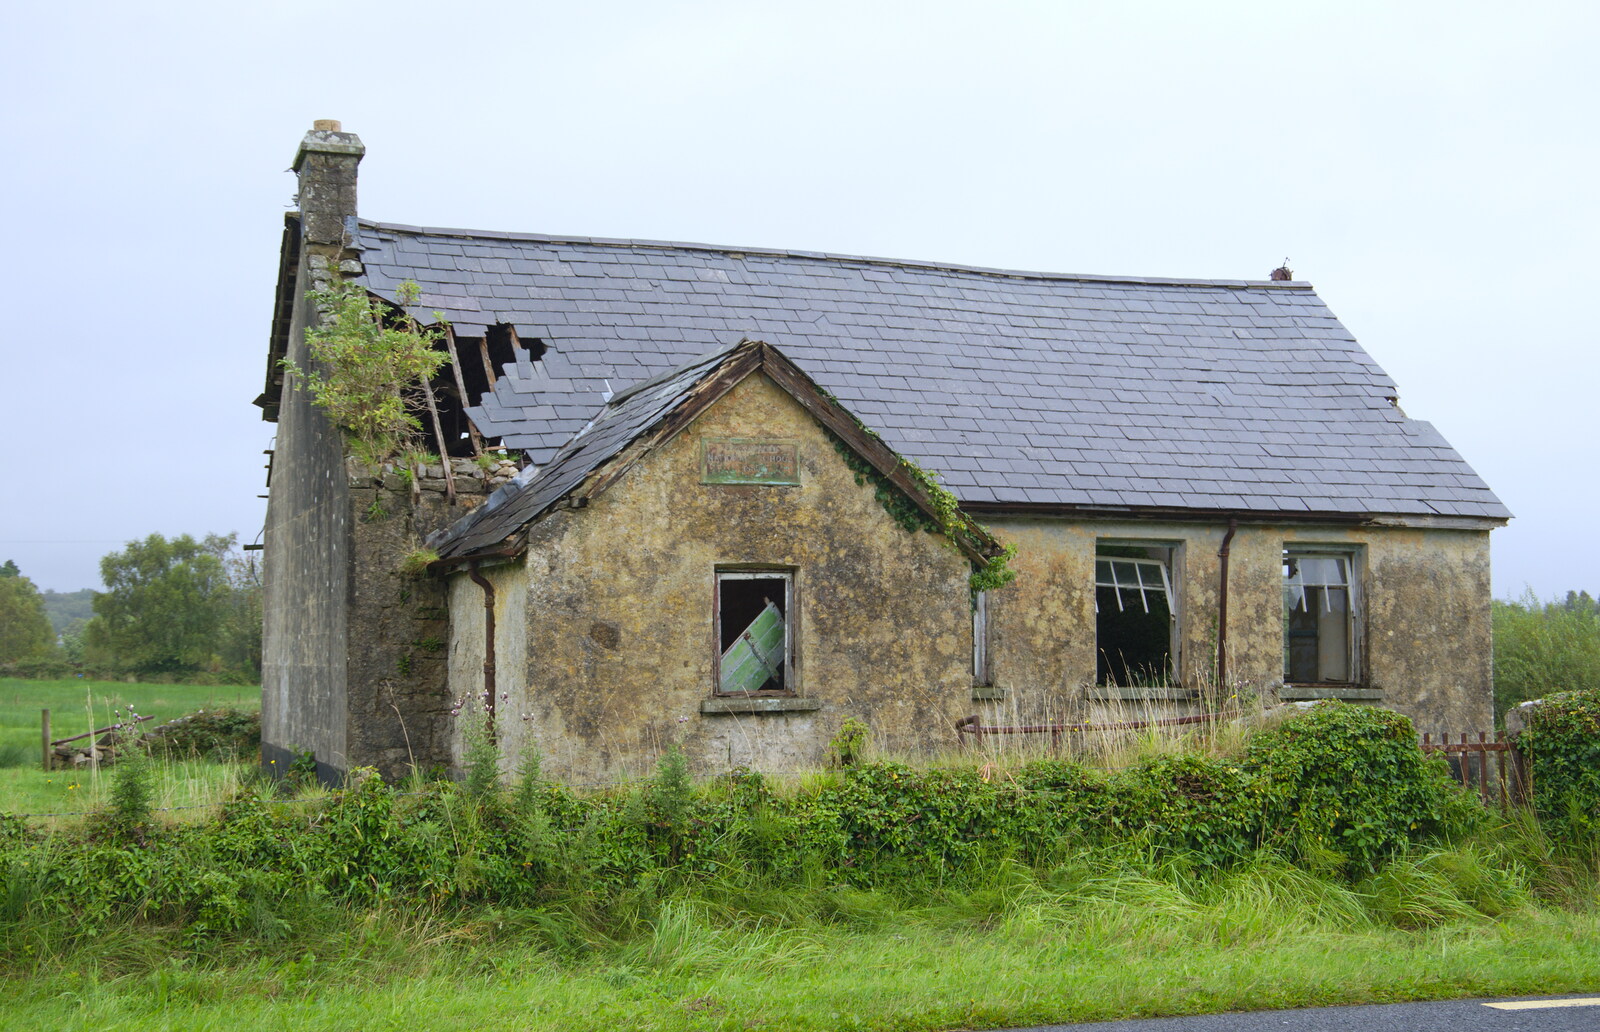 Brockagh National School near Glenfarne from Travels in the Borderlands: An Blaic/Blacklion to Belcoo and back, Cavan and Fermanagh, Ireland - 22nd August 2019